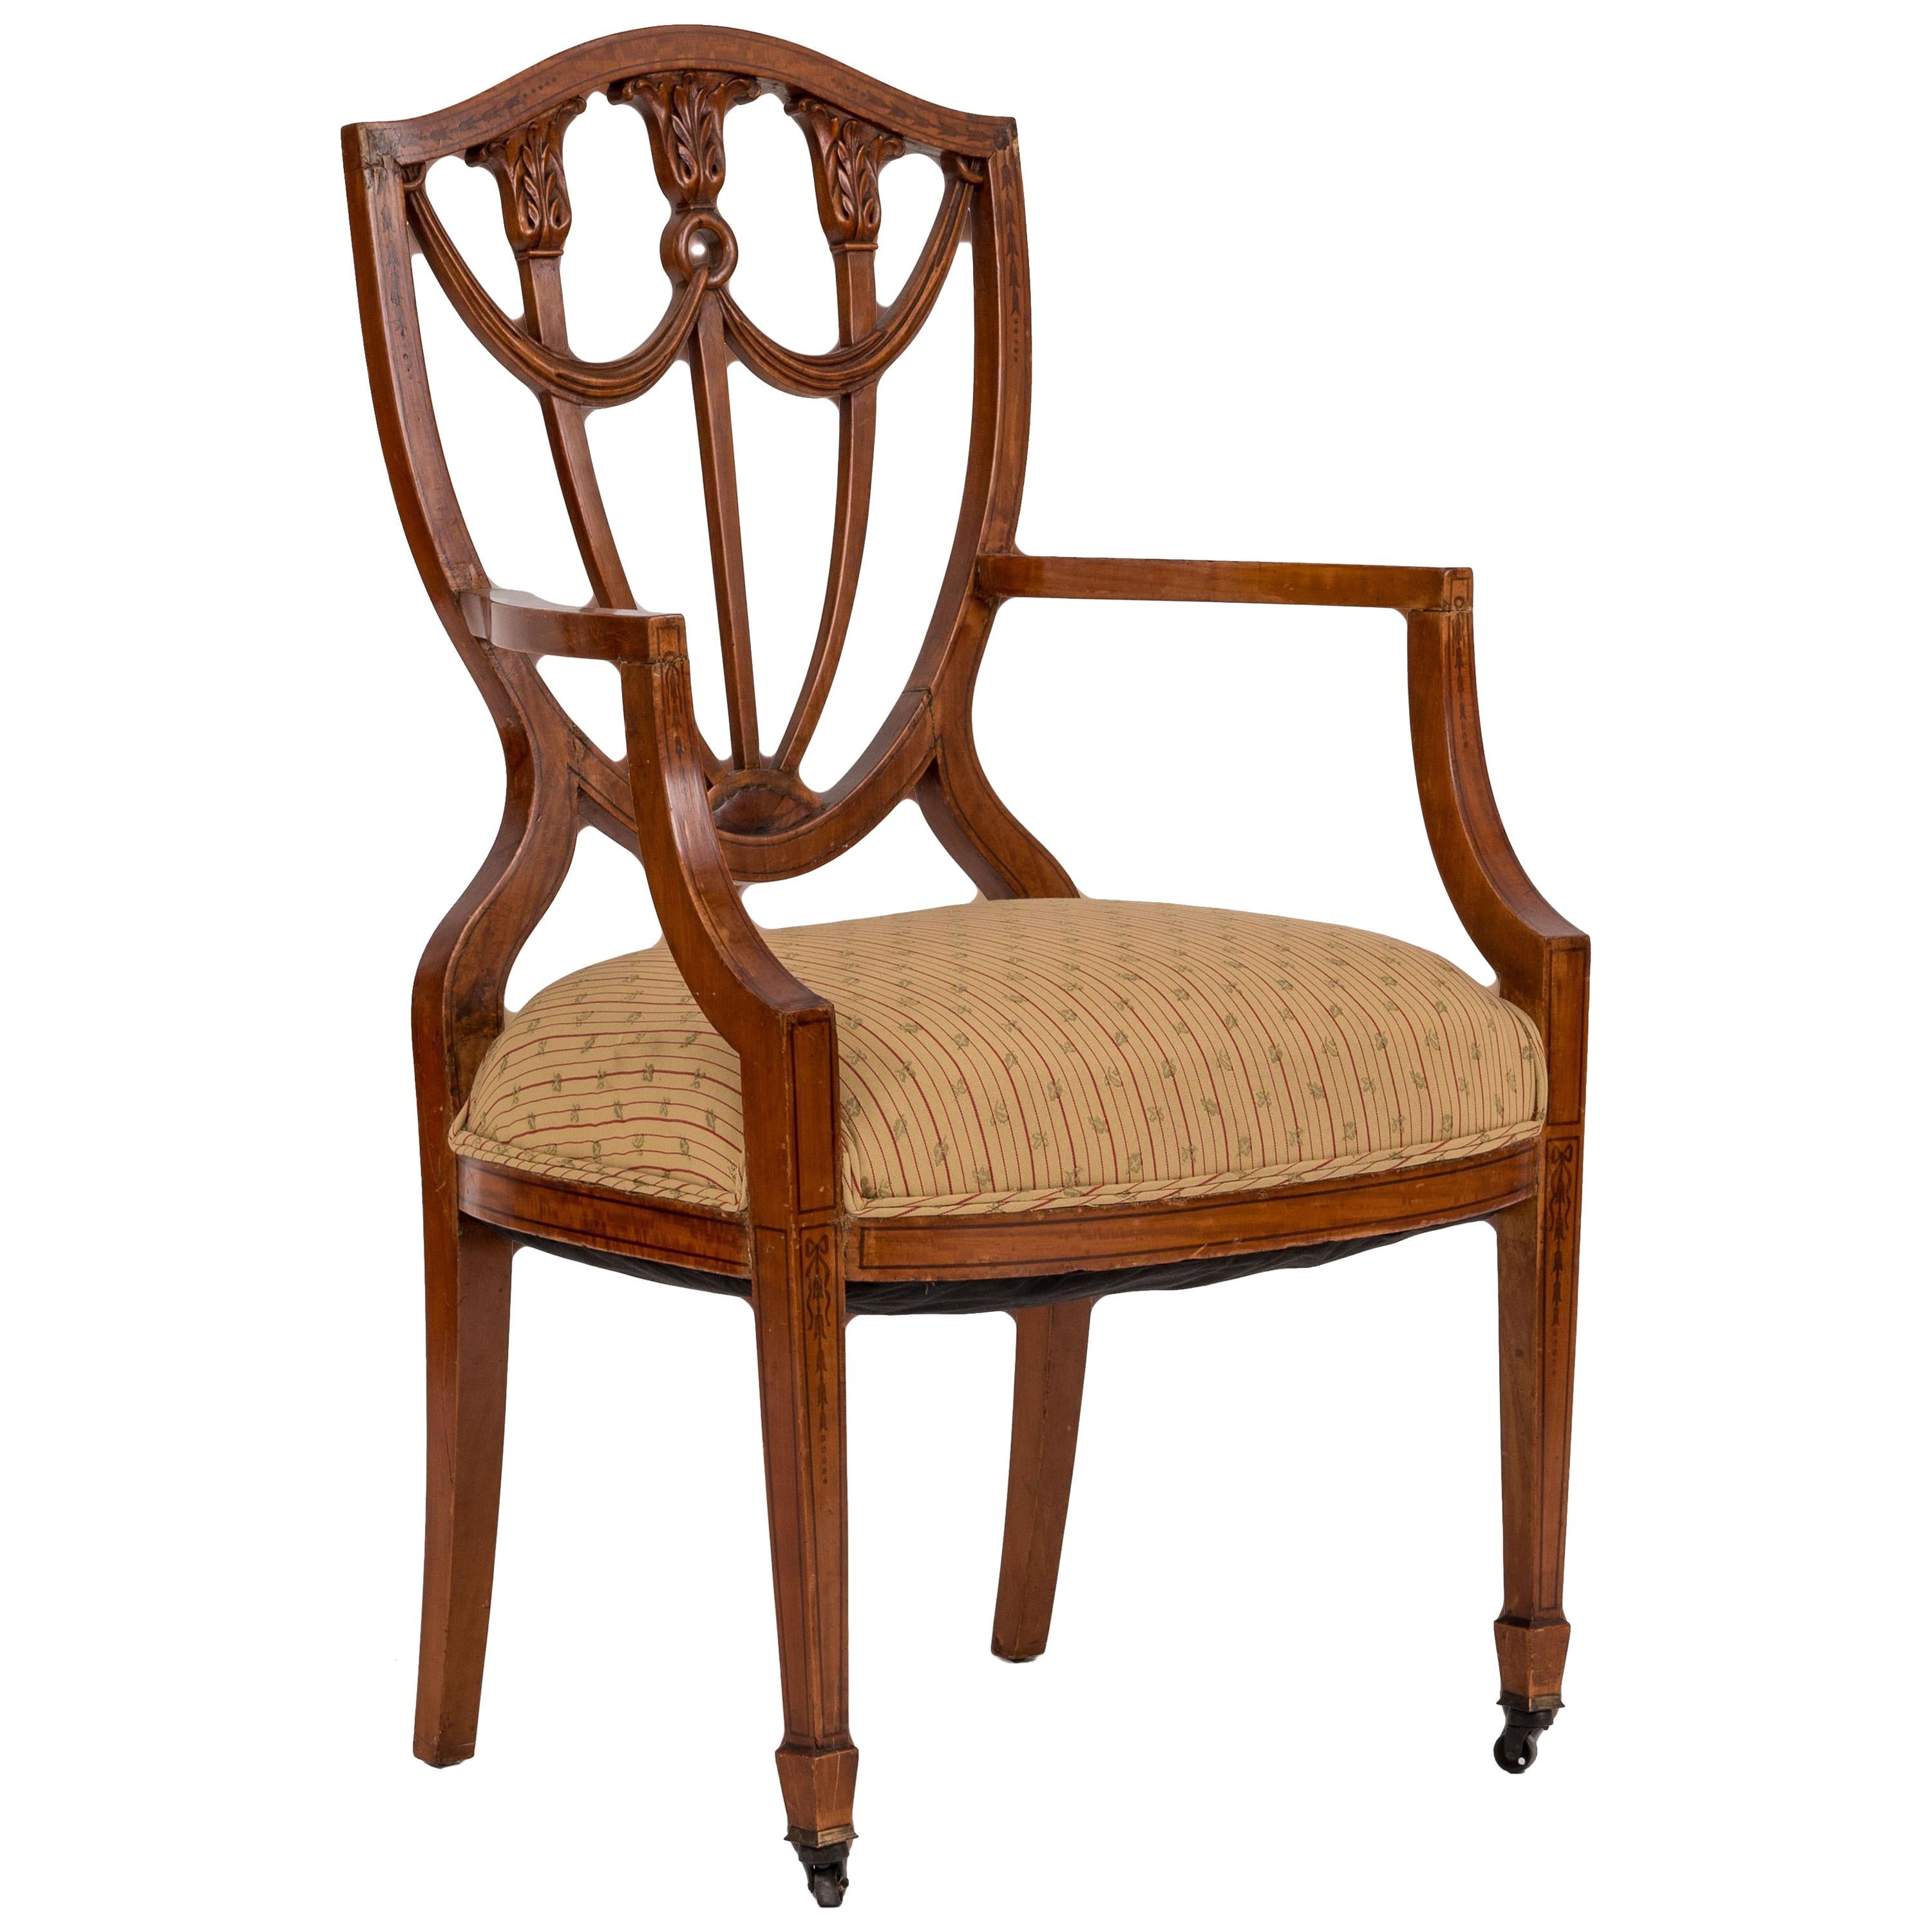 Pair of English Adam Style Shield-Back Chairs